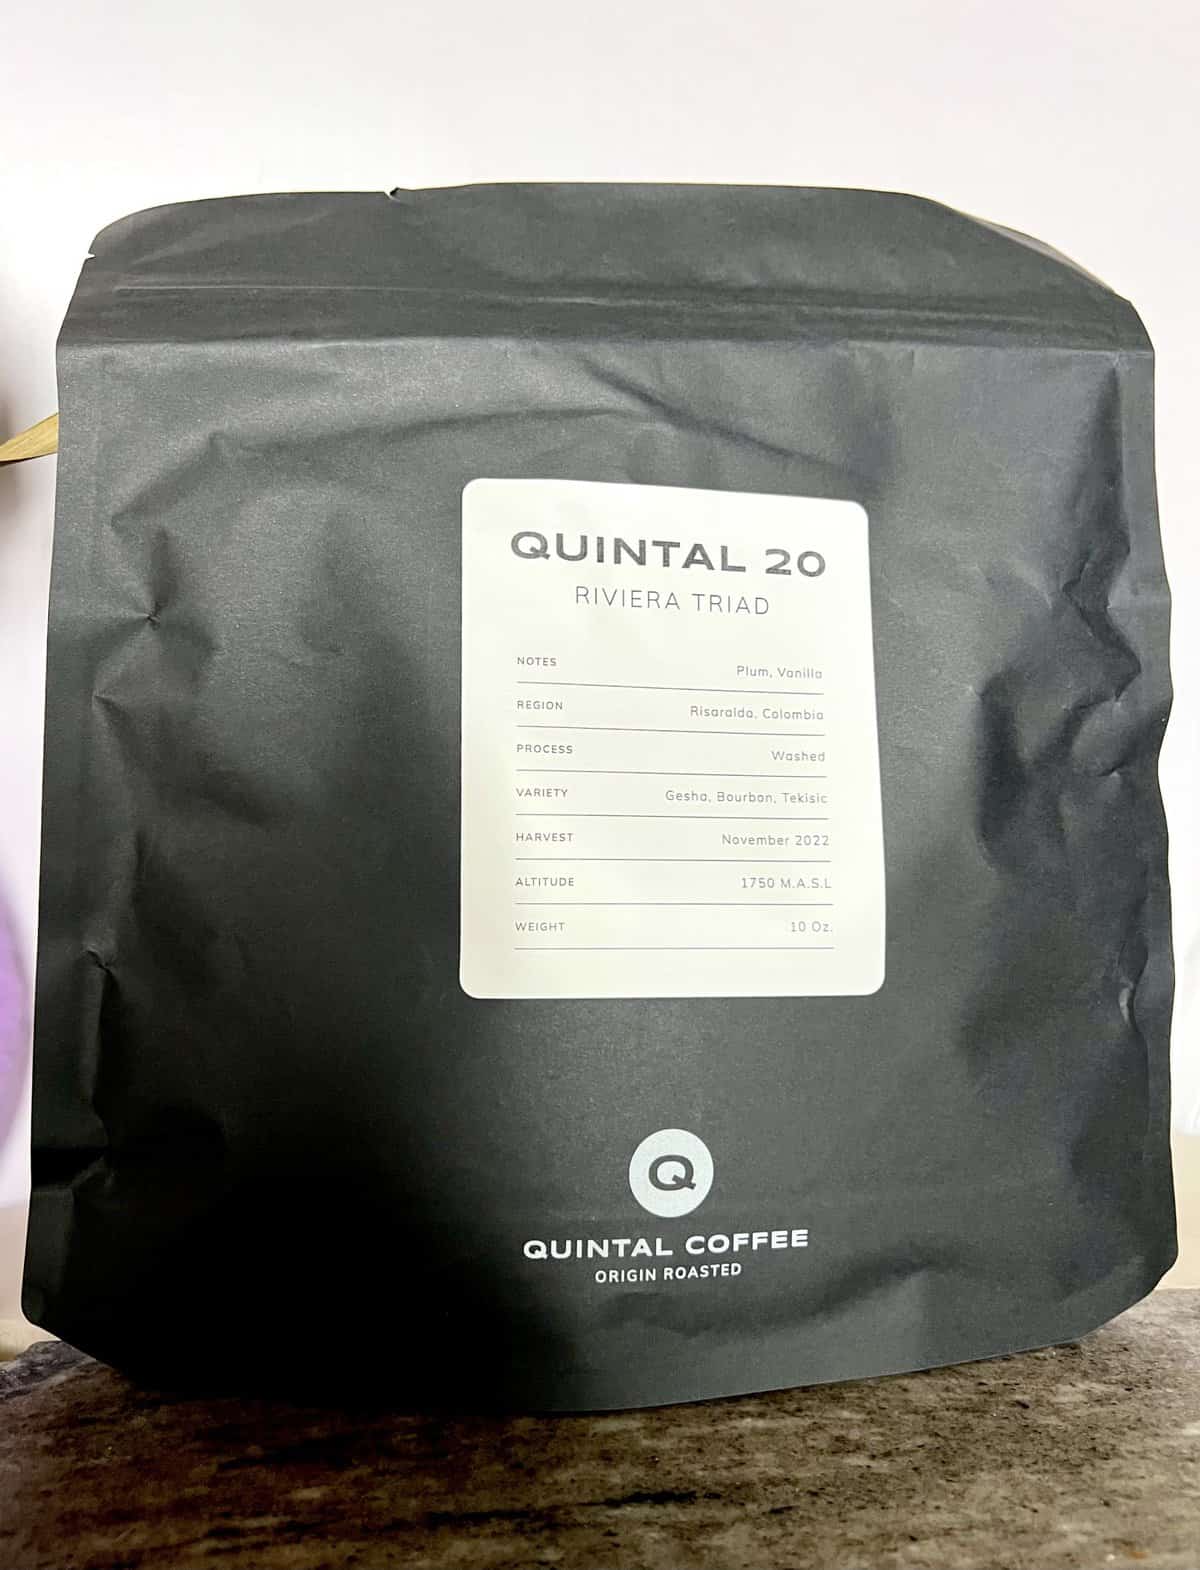 Black-packaging-of-coffee-Quintal-No.-20-Riviera-Triad-scaled